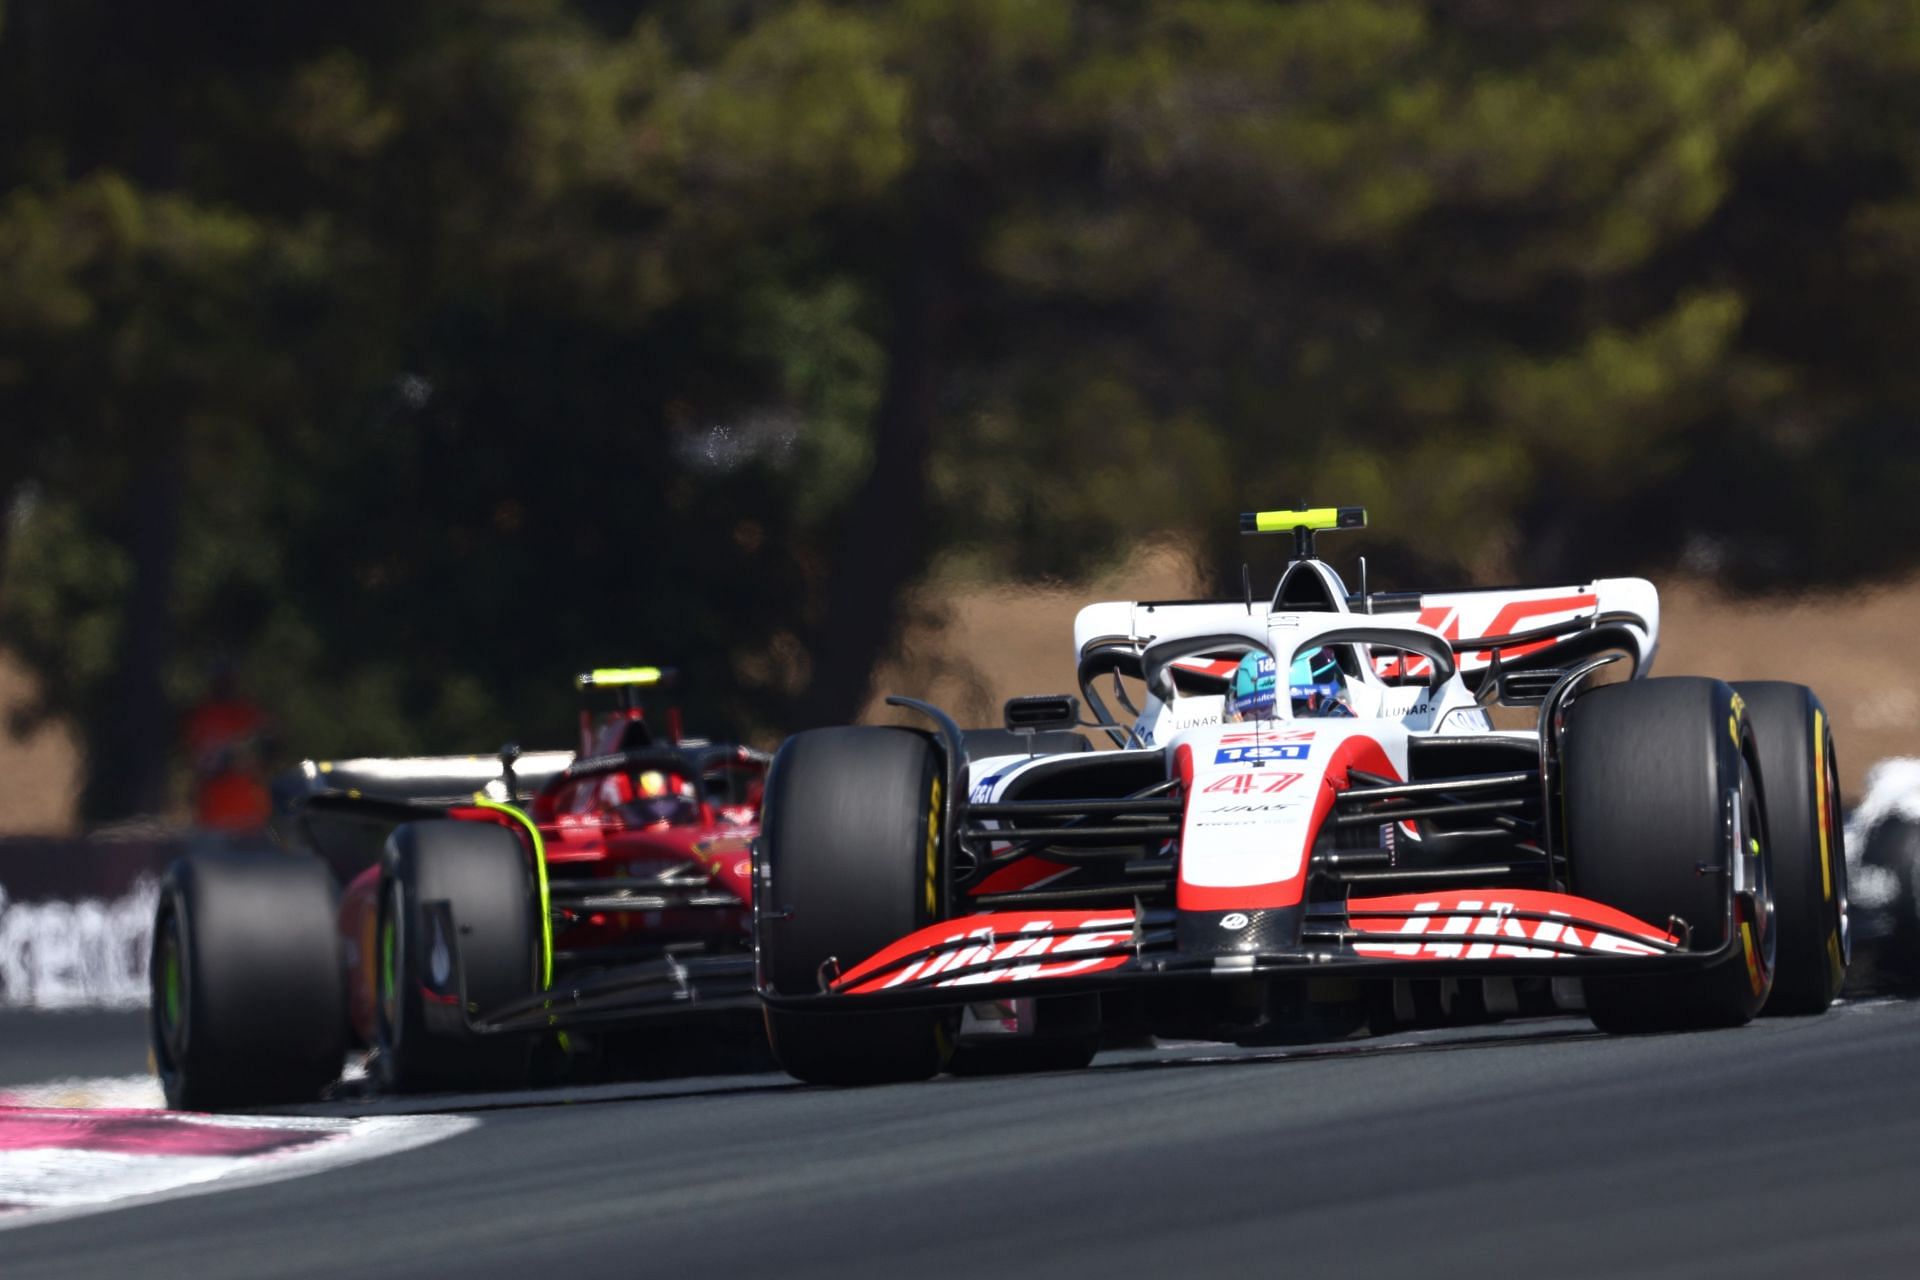 Haas will be bringing its first and only upgrade for the 2022 F1 season